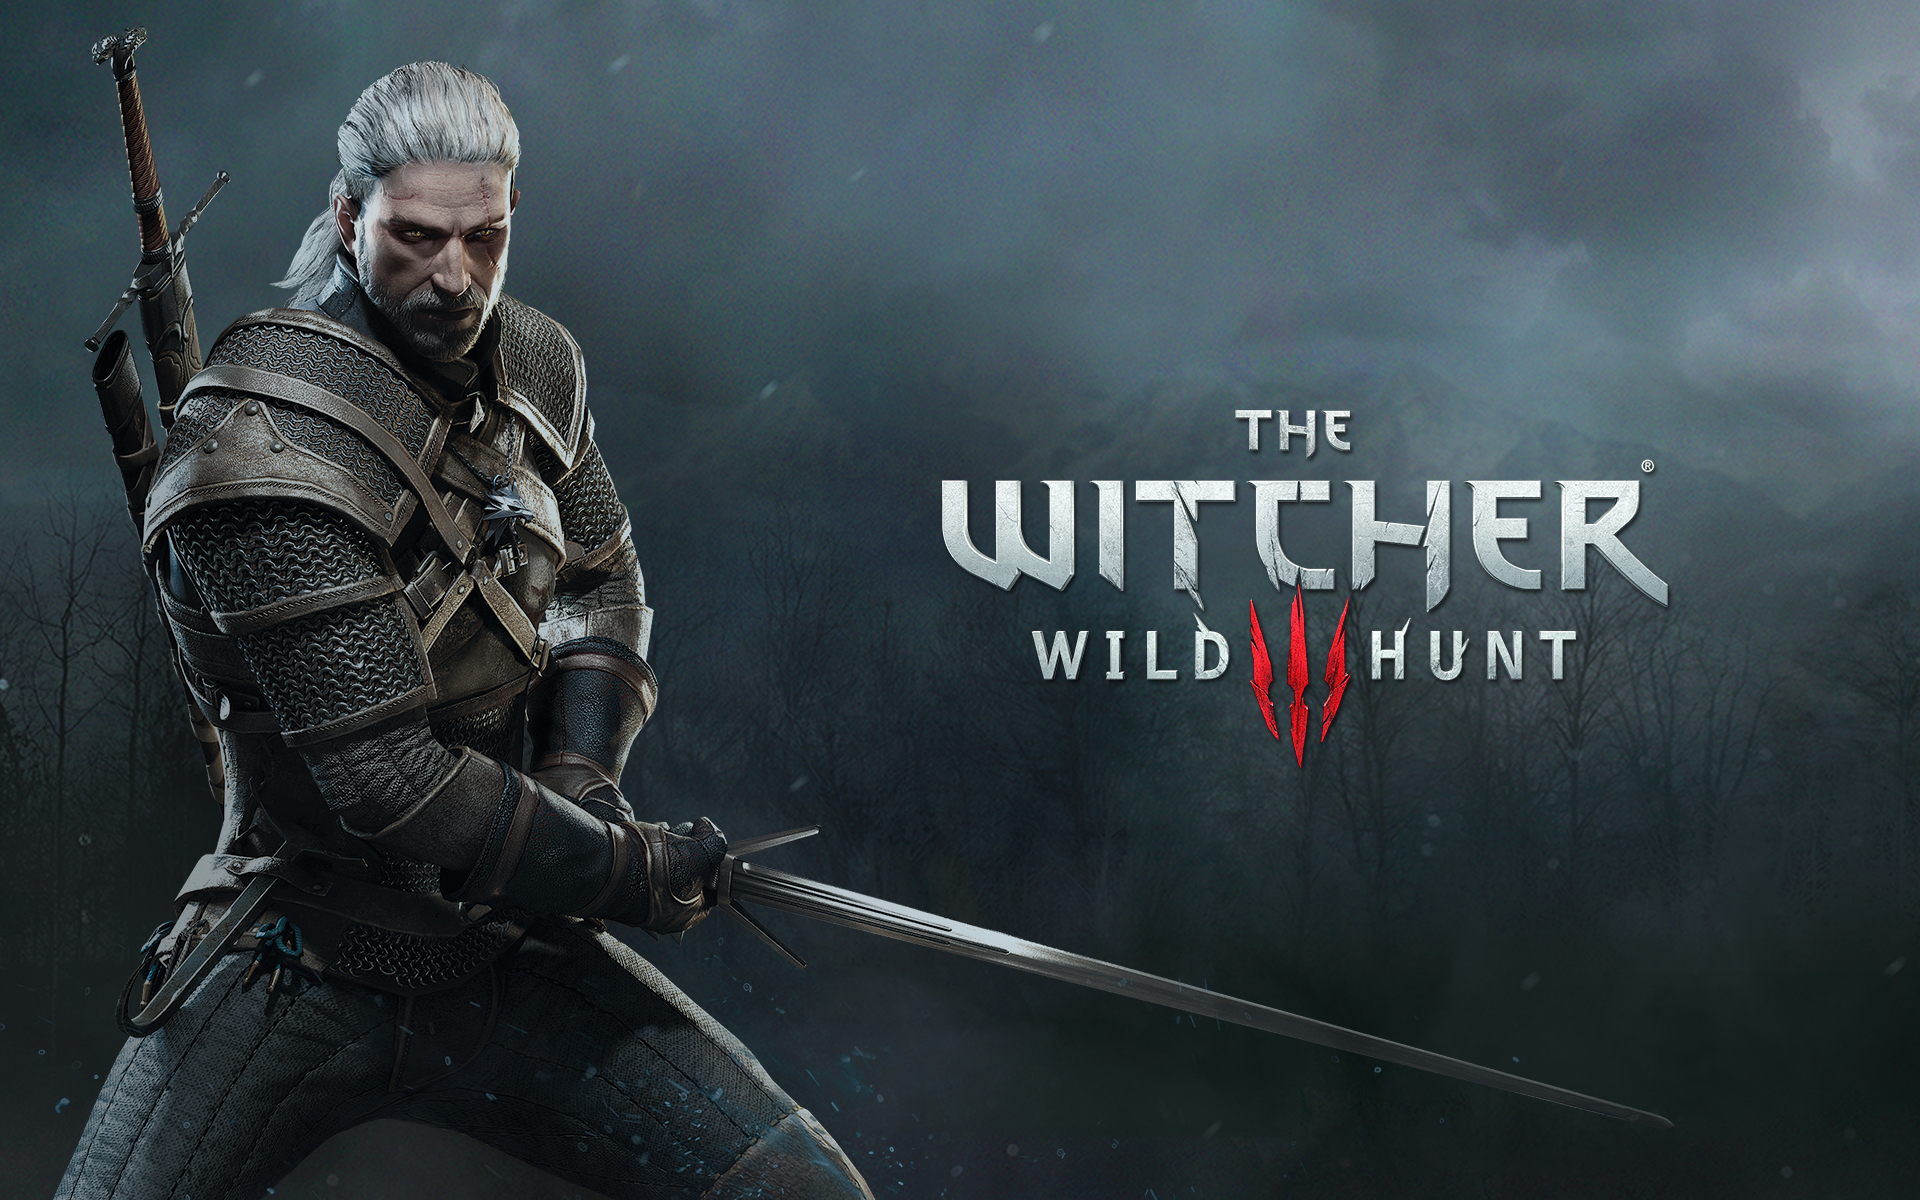 the witcher 3 wild hunt wallpaper,action adventure game,movie,pc game,action film,adventure game